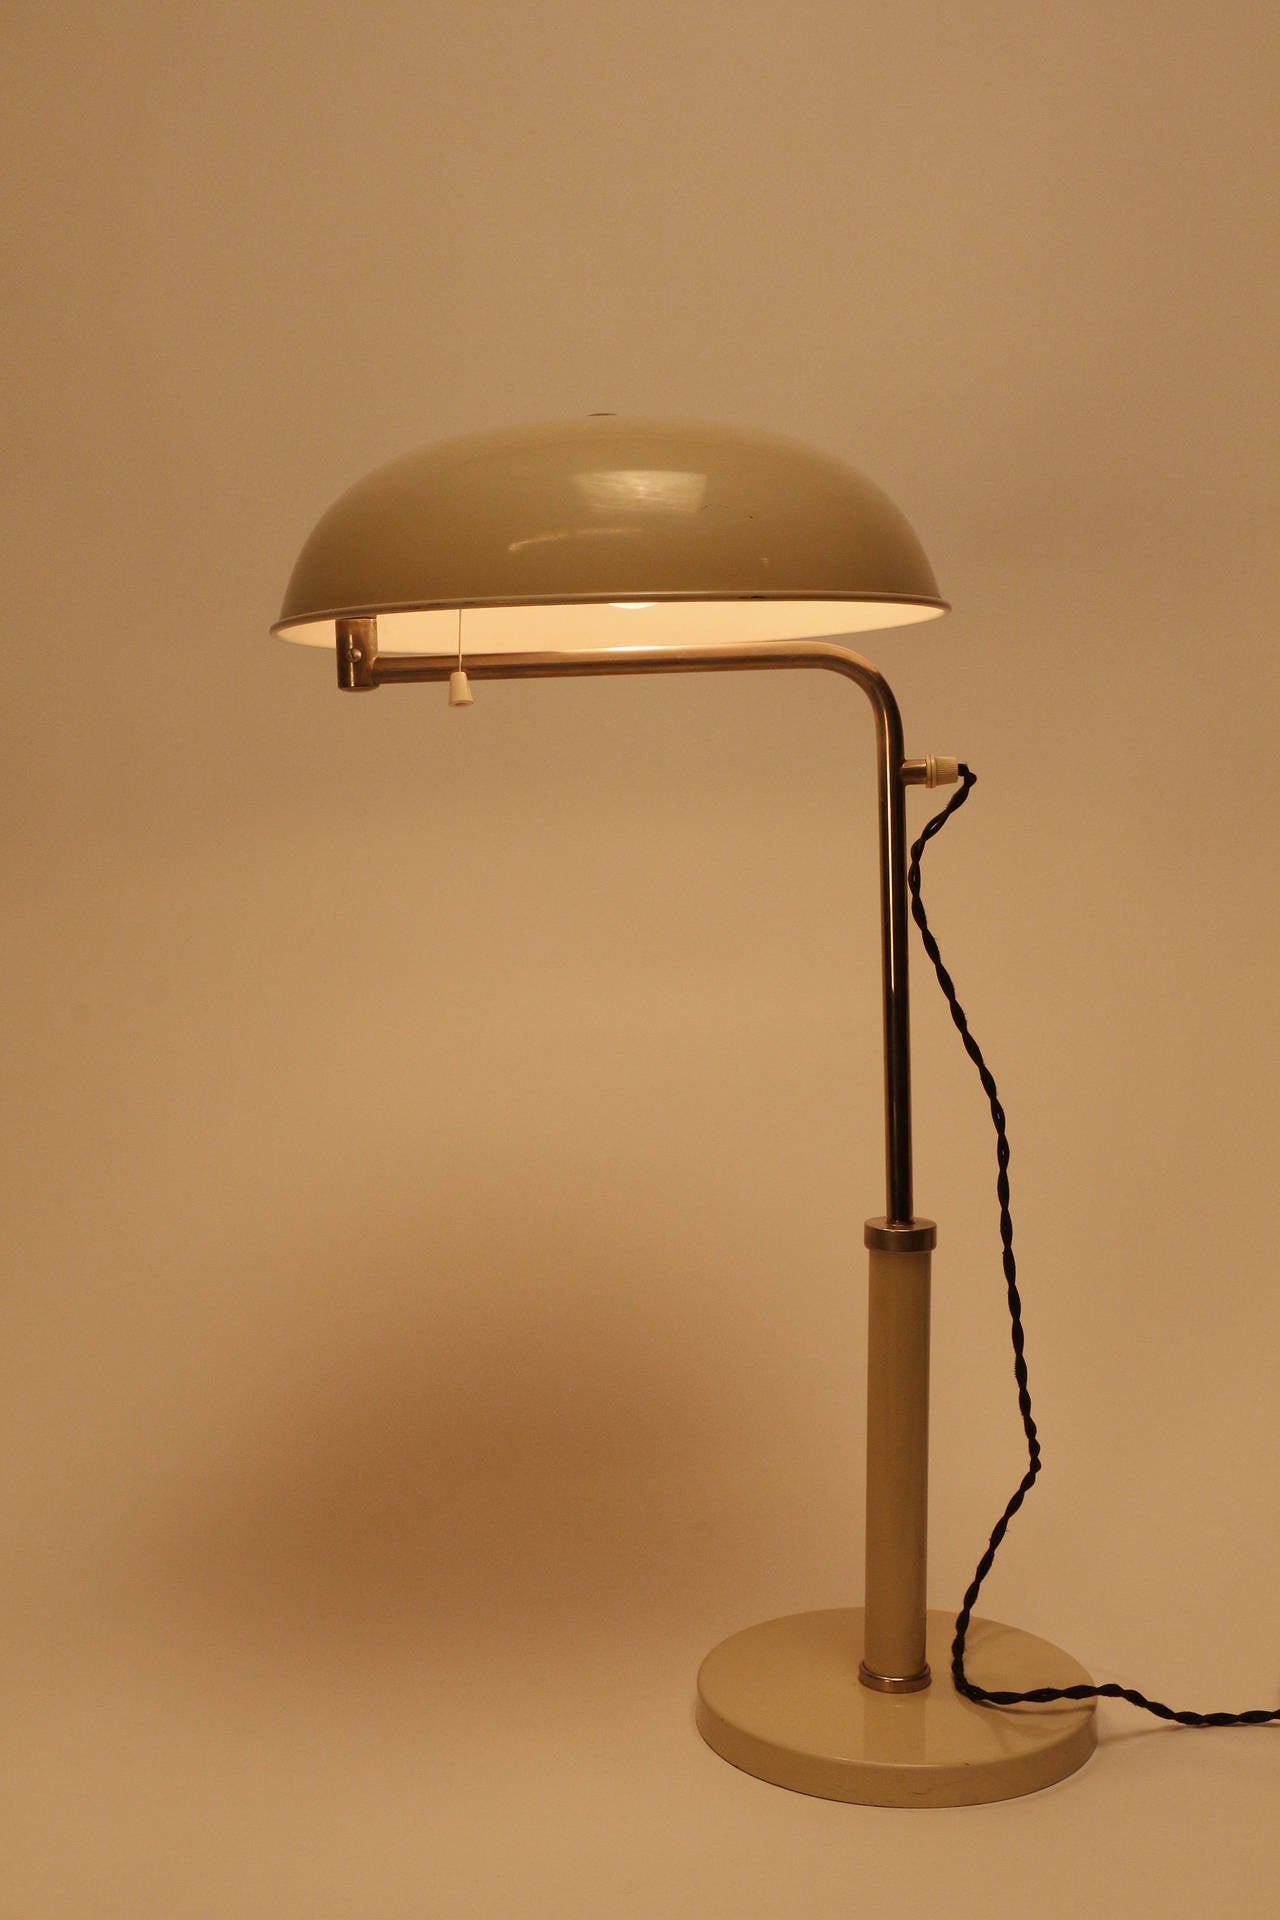 Bauhaus Desk Lamp Quick 1500 by Alfred Mueller for Amba For Sale 4